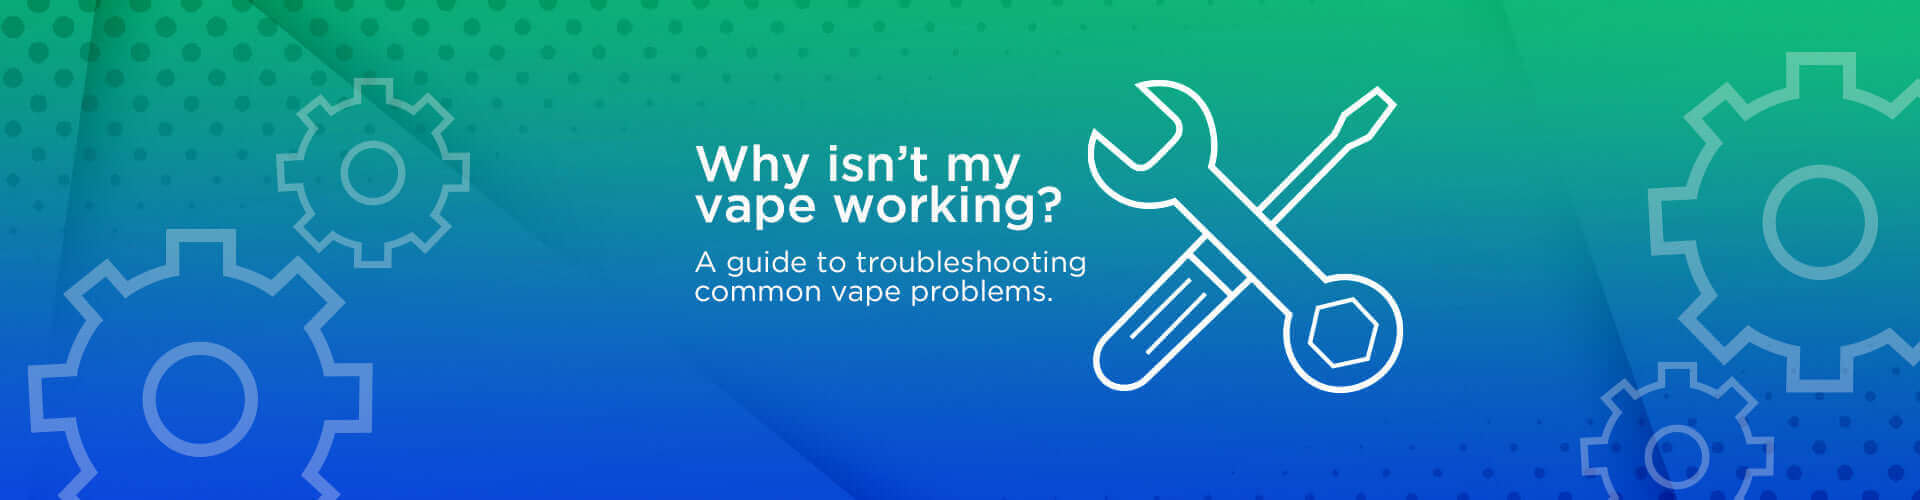 Why isn’t my vape working? The ultimate guide to vape troubleshooting - 888 Vapour